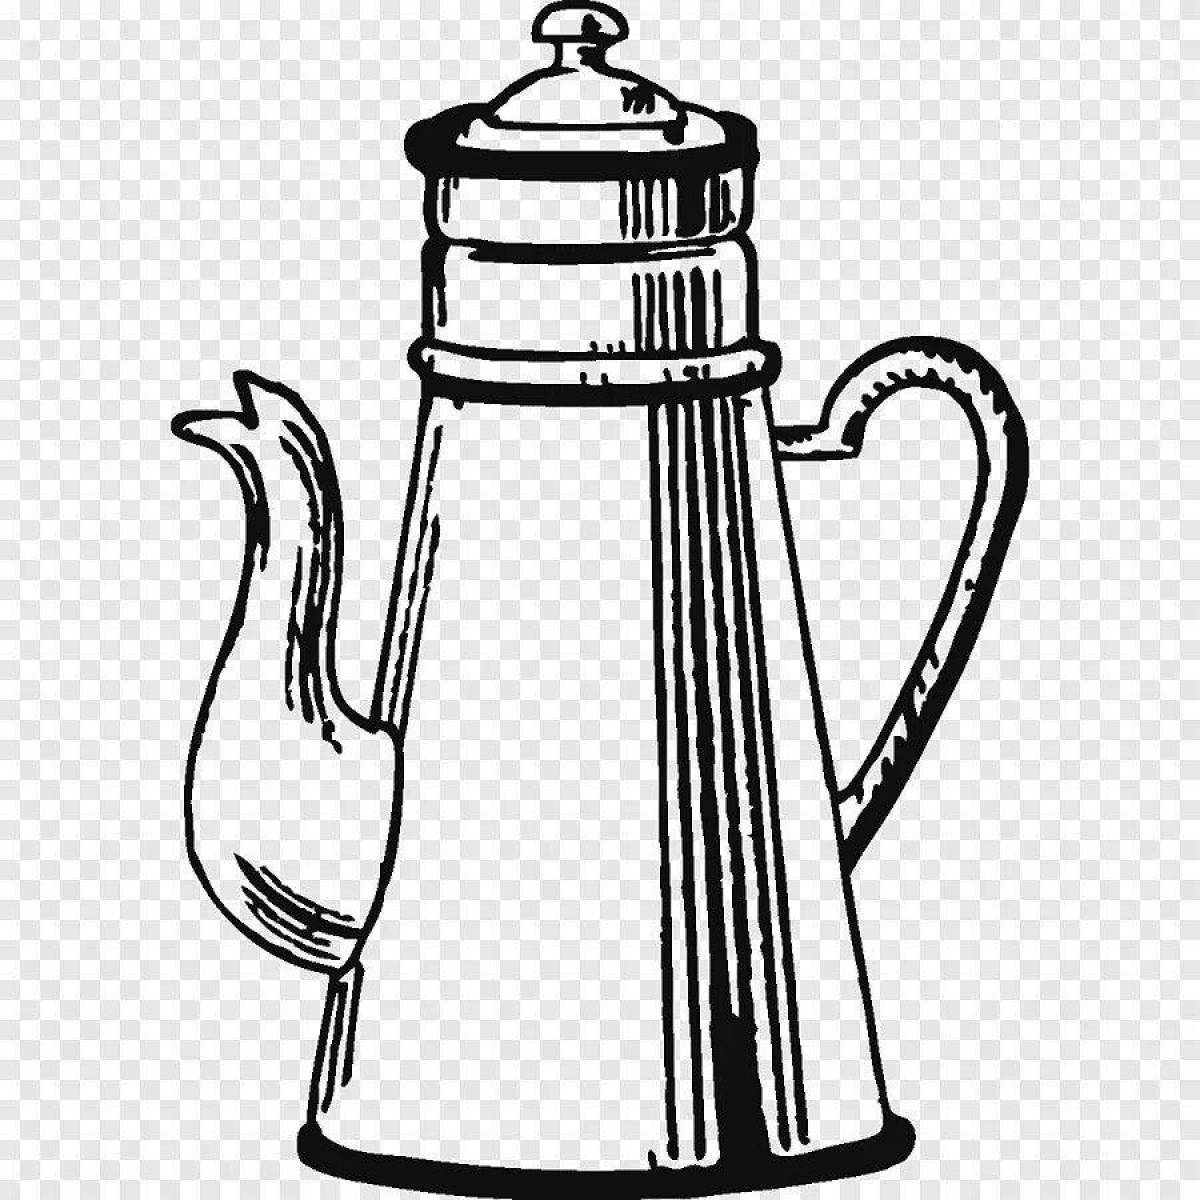 Glittering kettle coloring page for kids